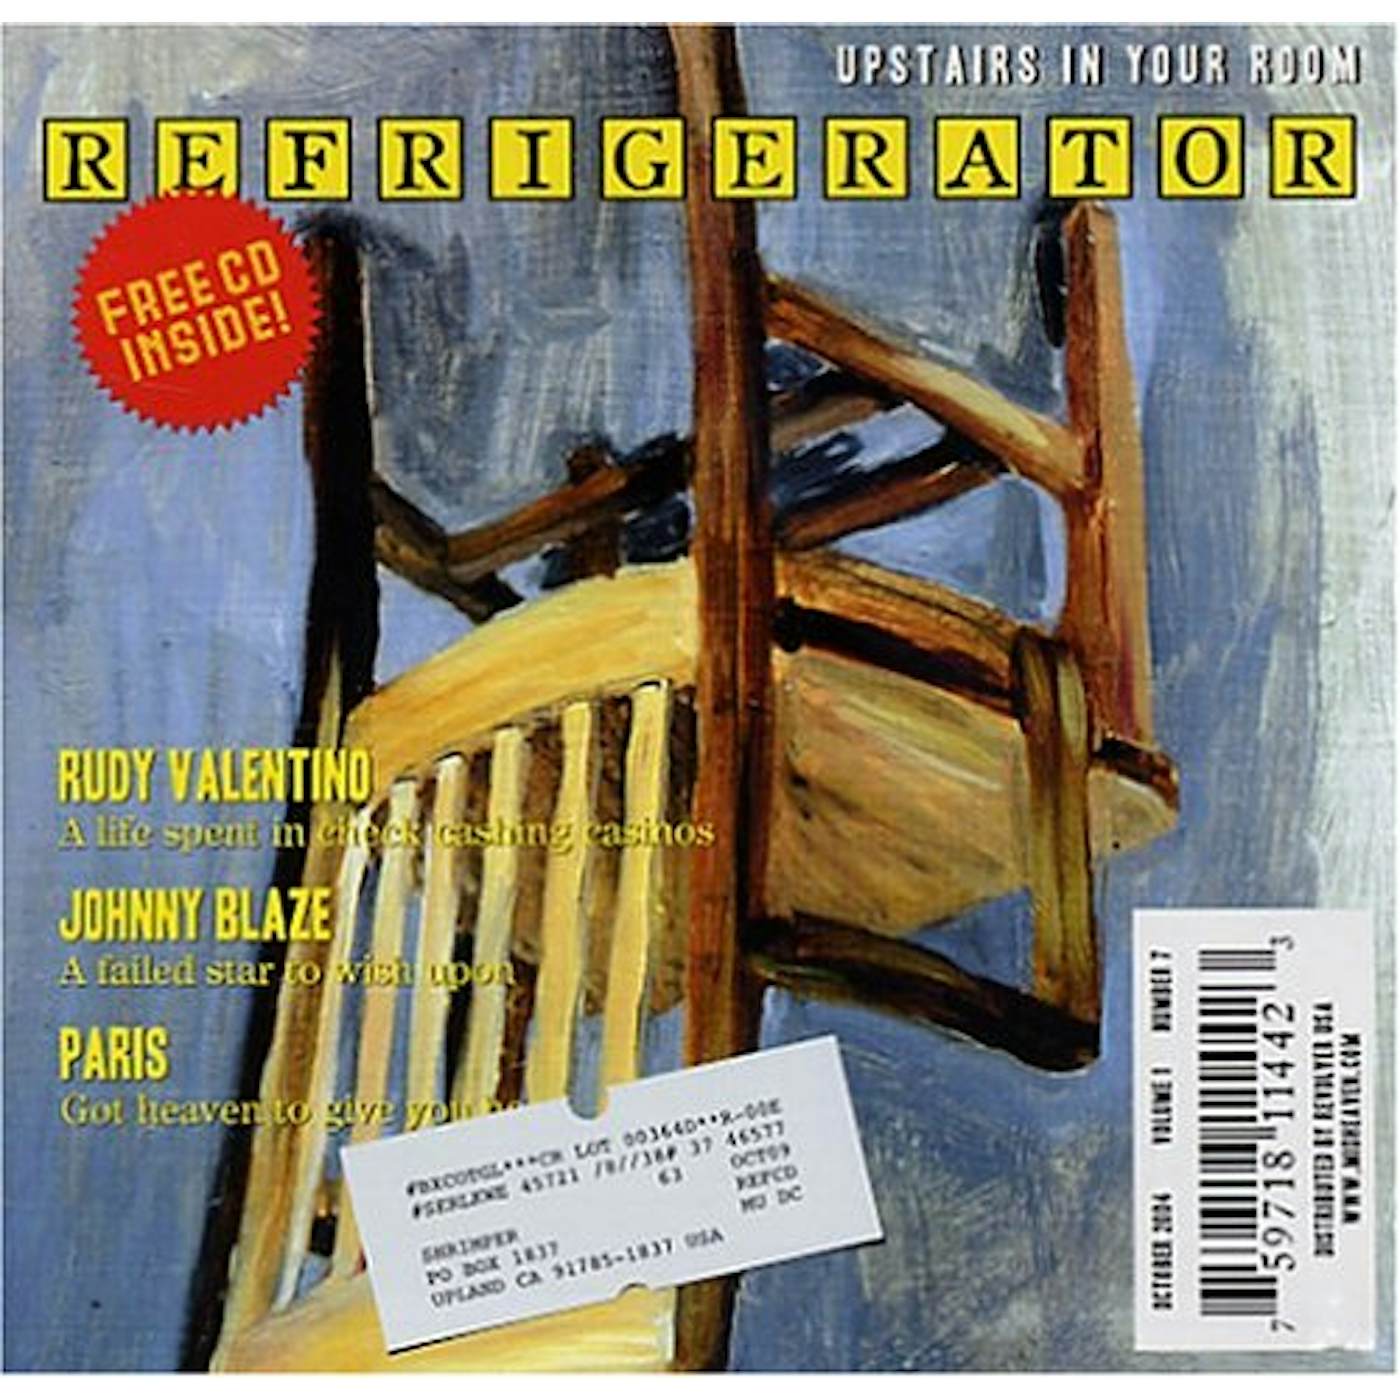 Refrigerator UPSTAIRS IN YOUR ROOM CD